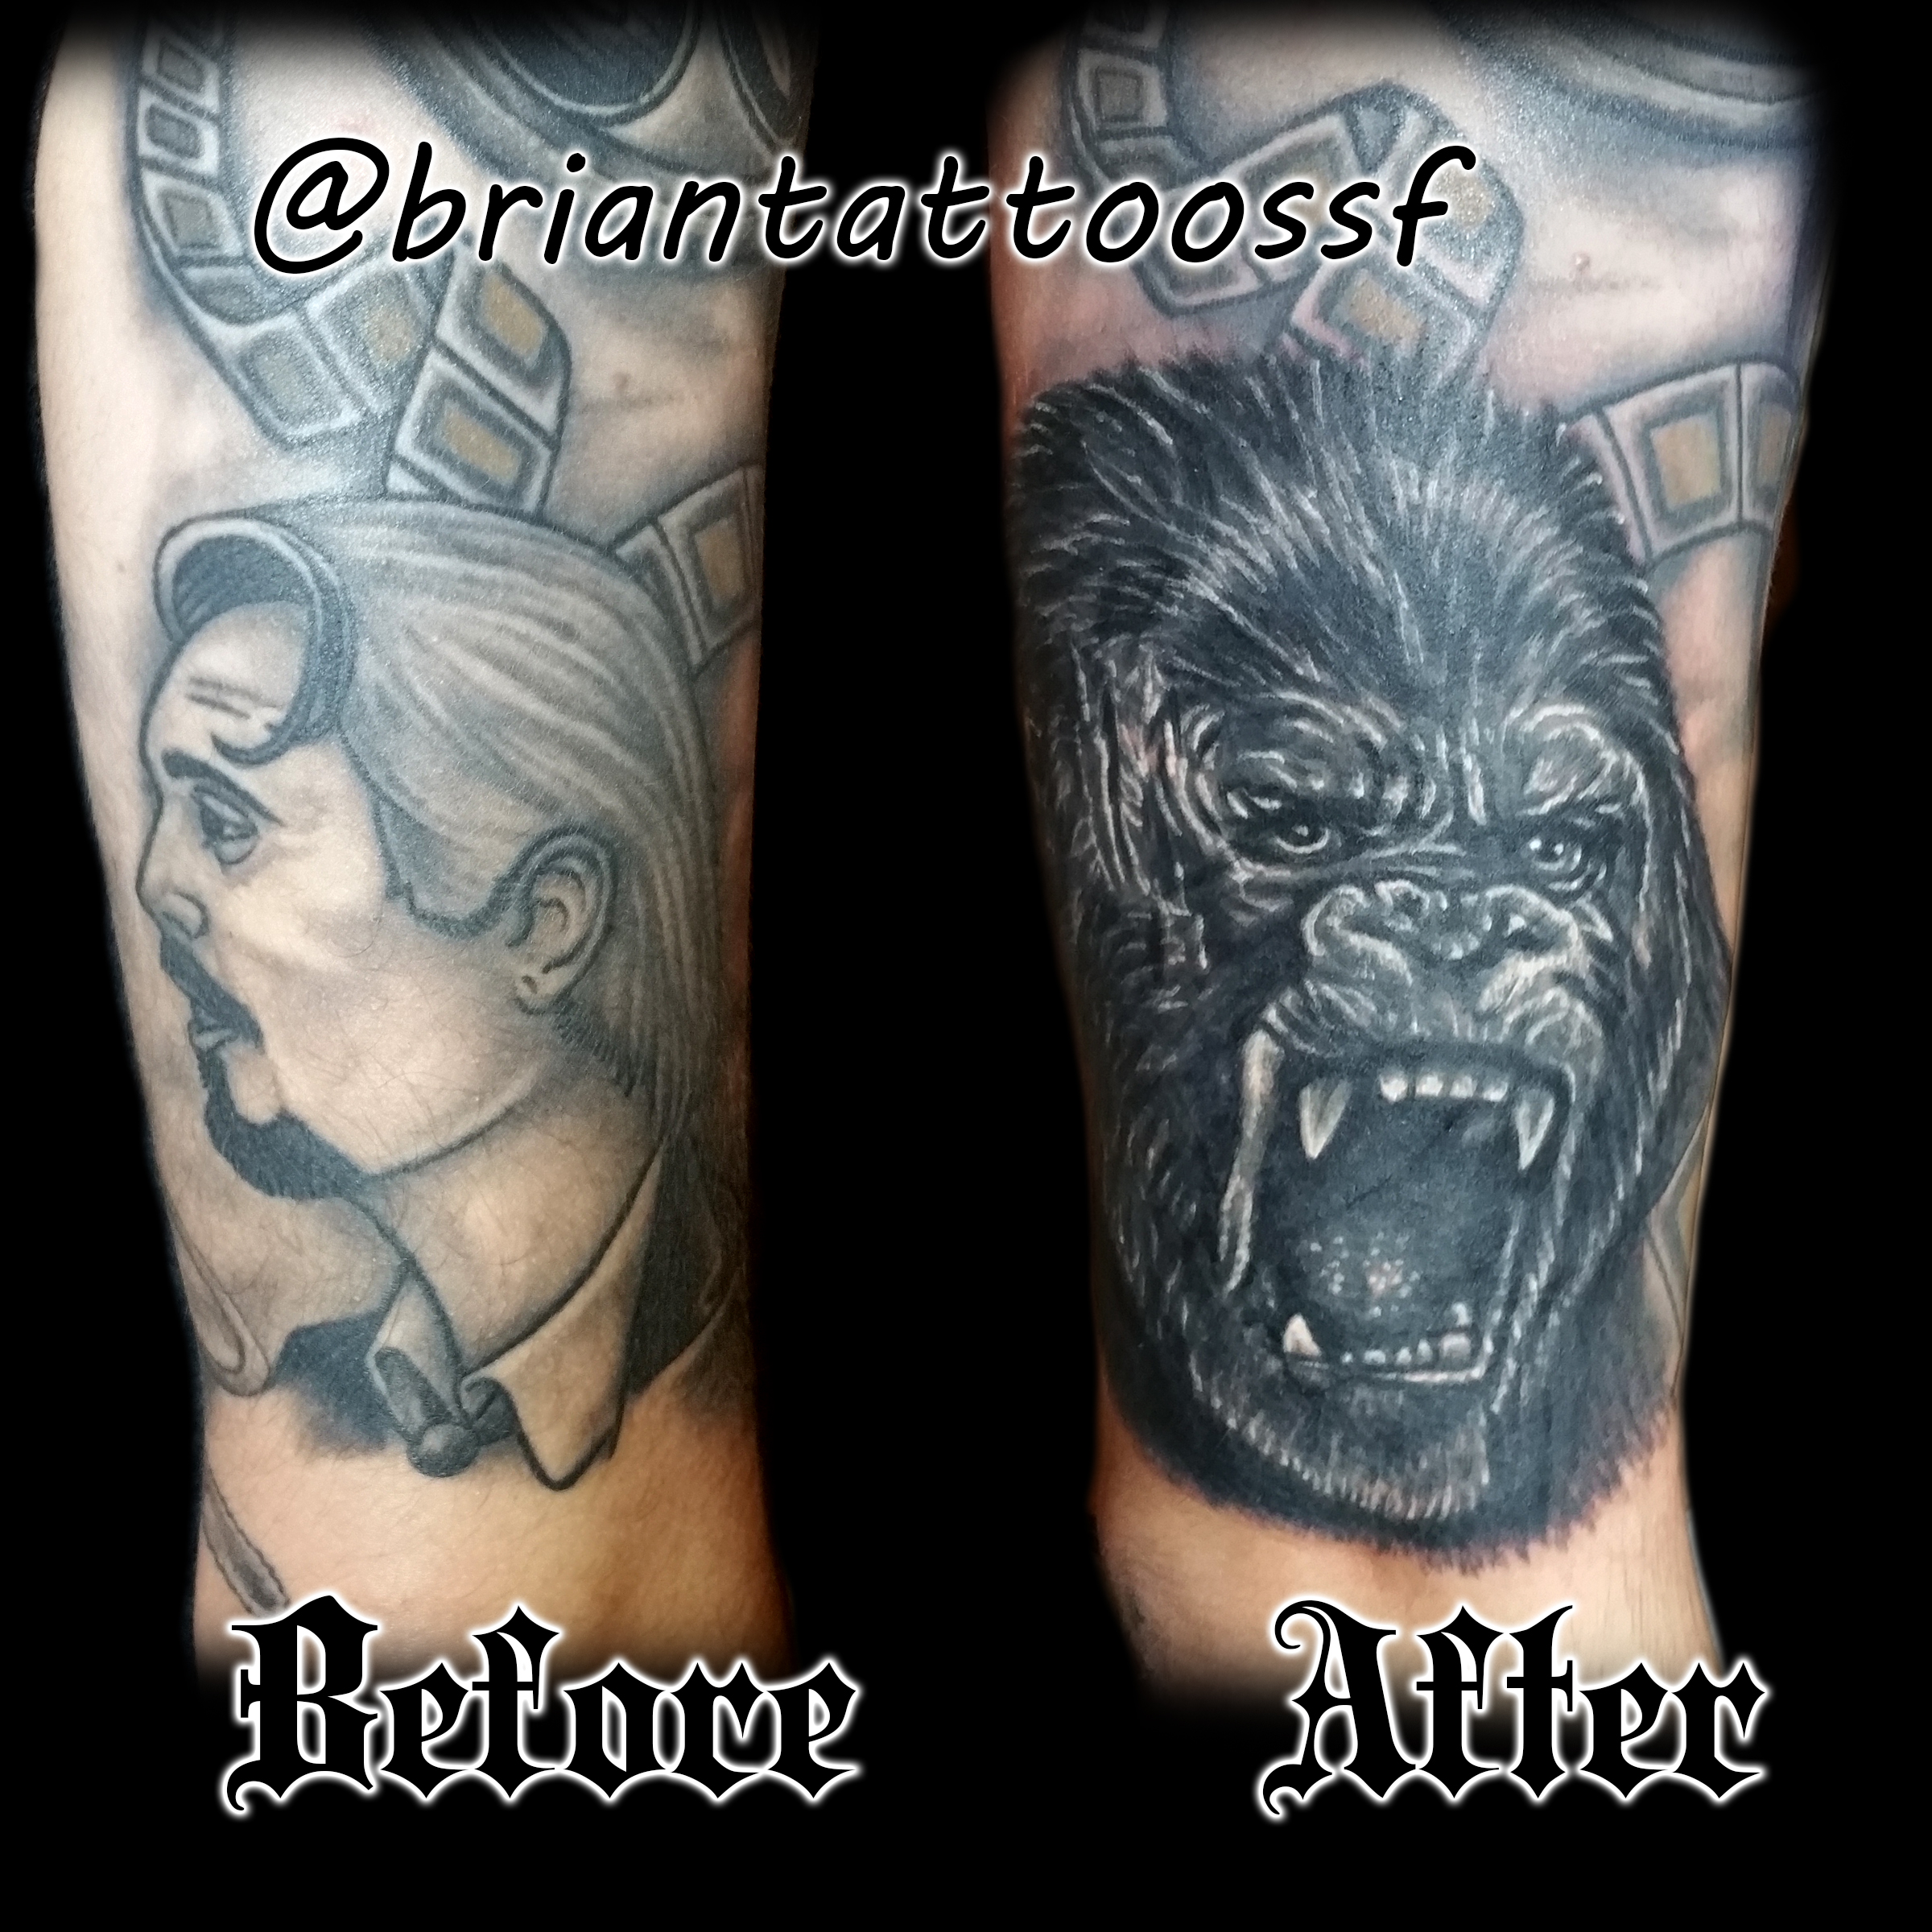 Best Cover Up Tattoo Shop in Miami, Cover Up Tattoo Artist Near Me